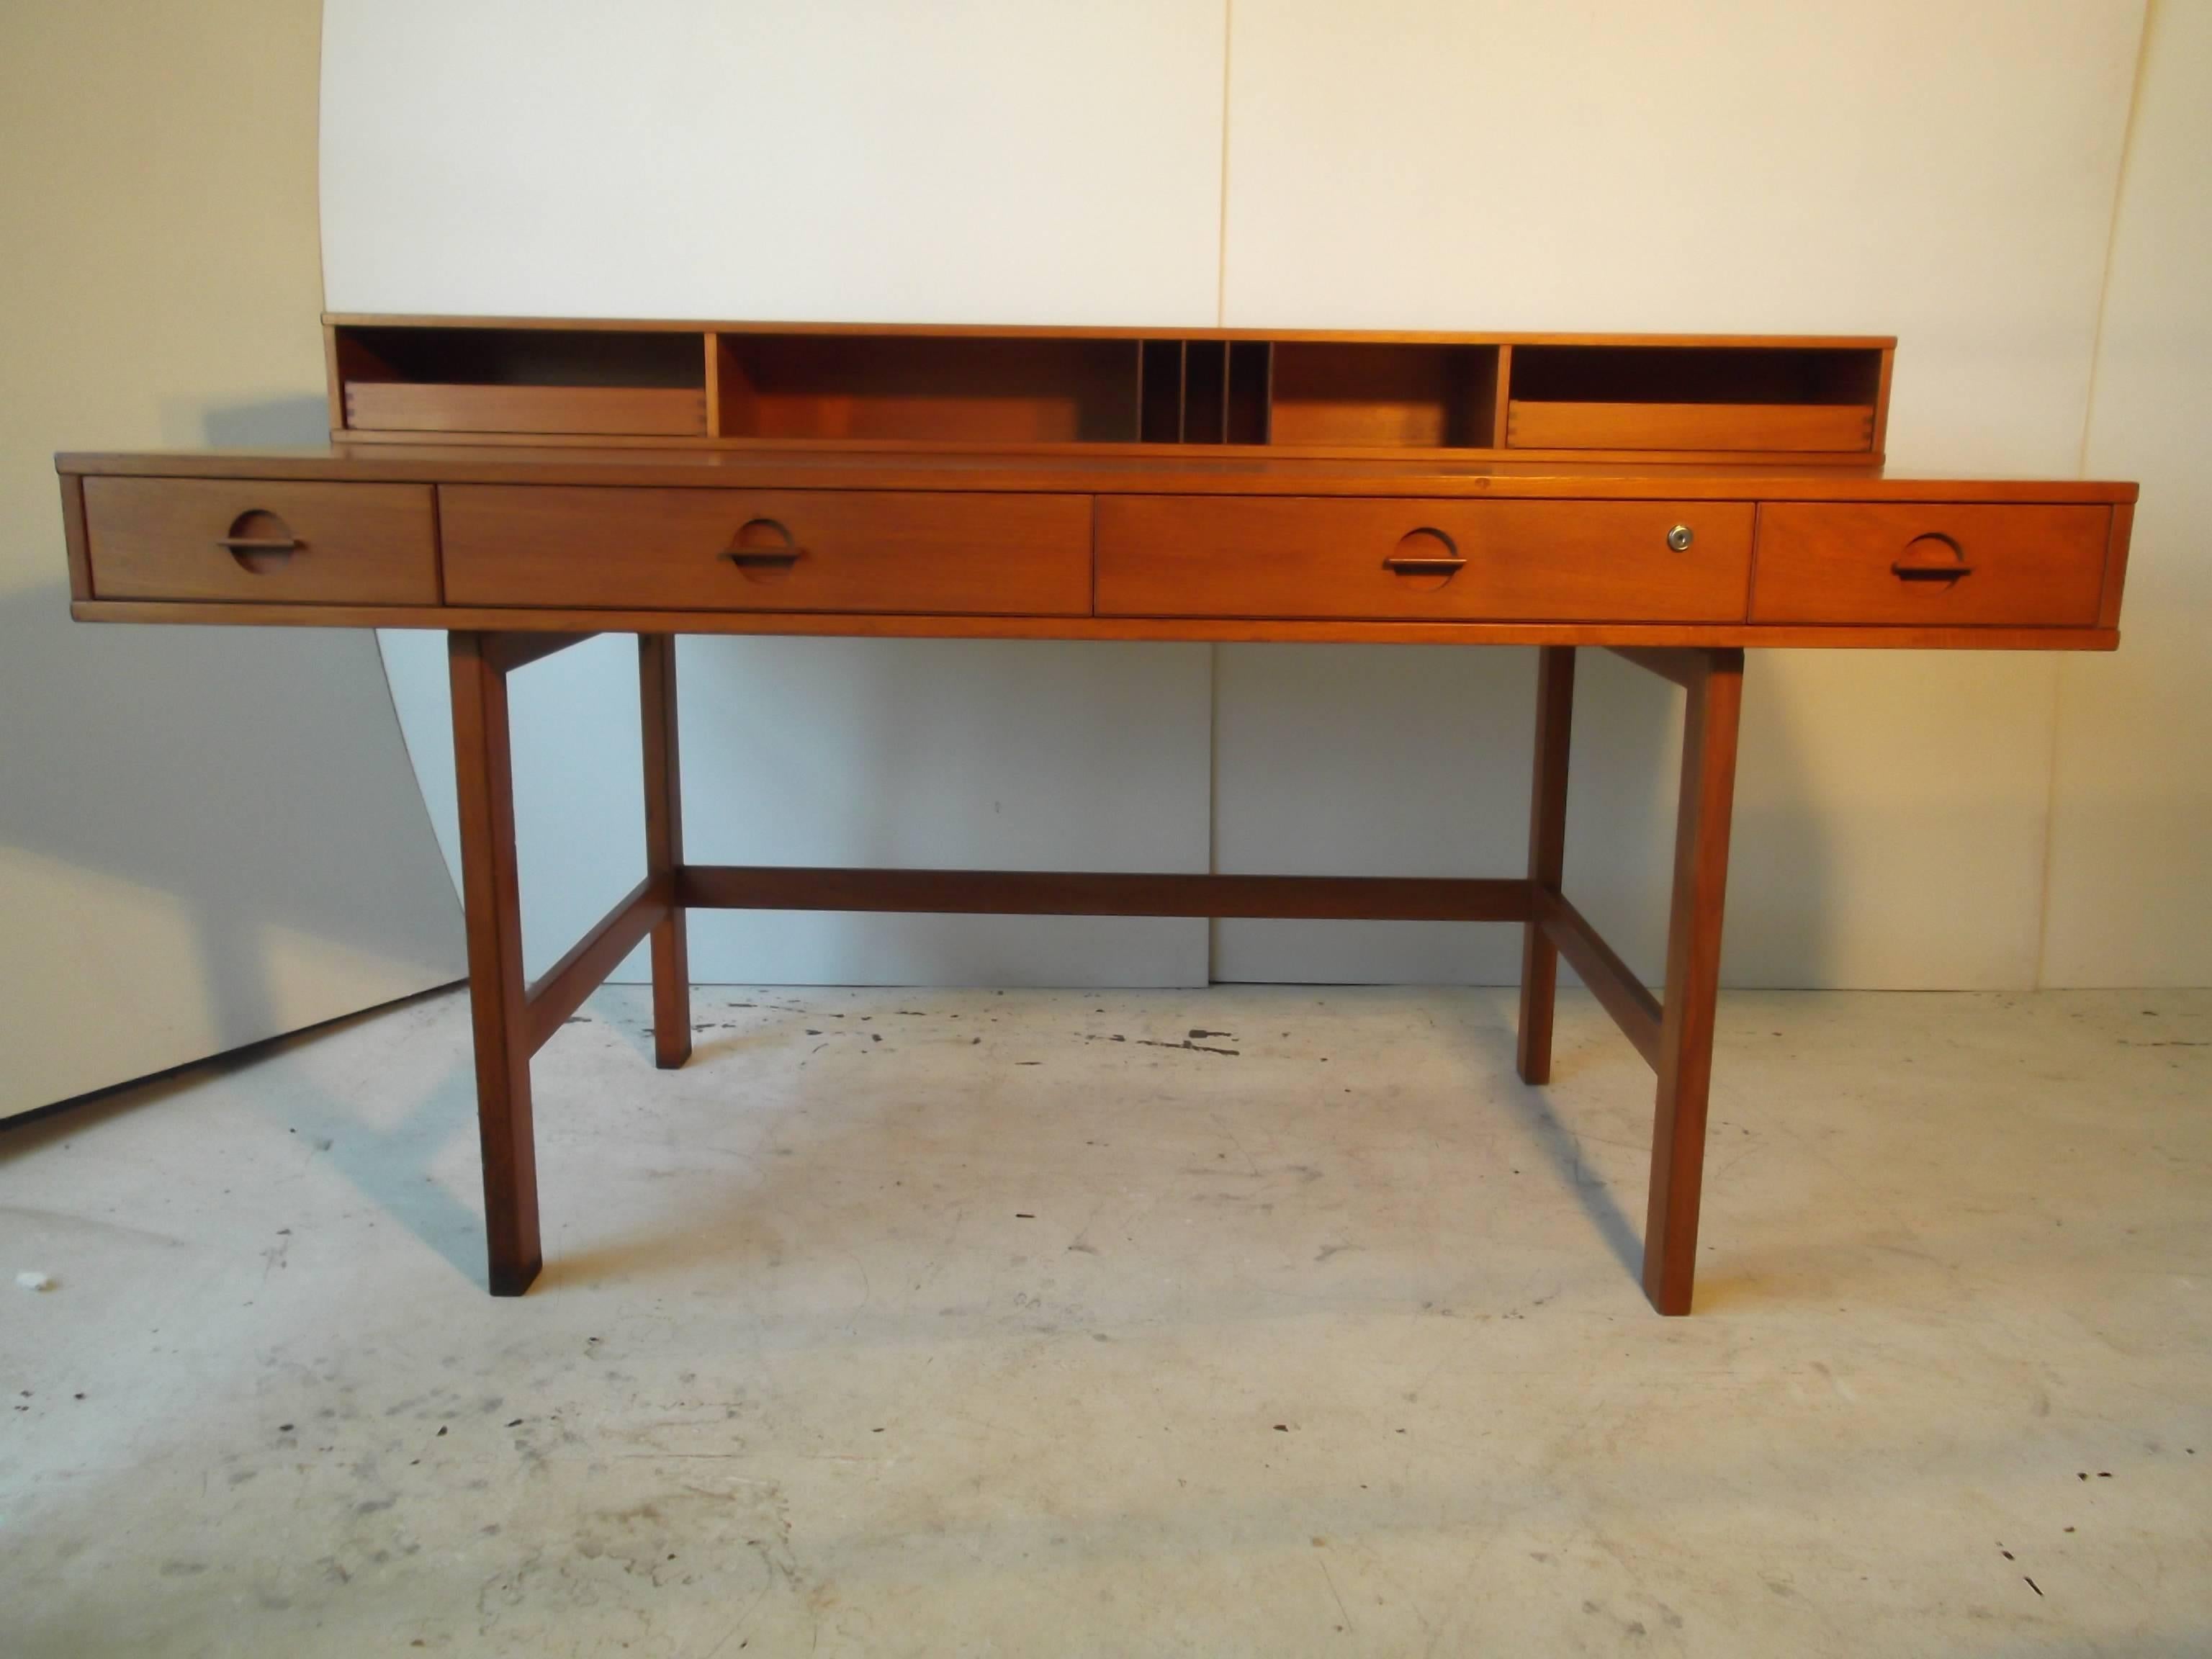 This is a beautiful teak Danish modern desk by Quistgaard for Lovig. It has four drawers across the front with mod handles. There is a cubby hole compartment across the back with two pull-out dovetailed letter trays. The back section flips